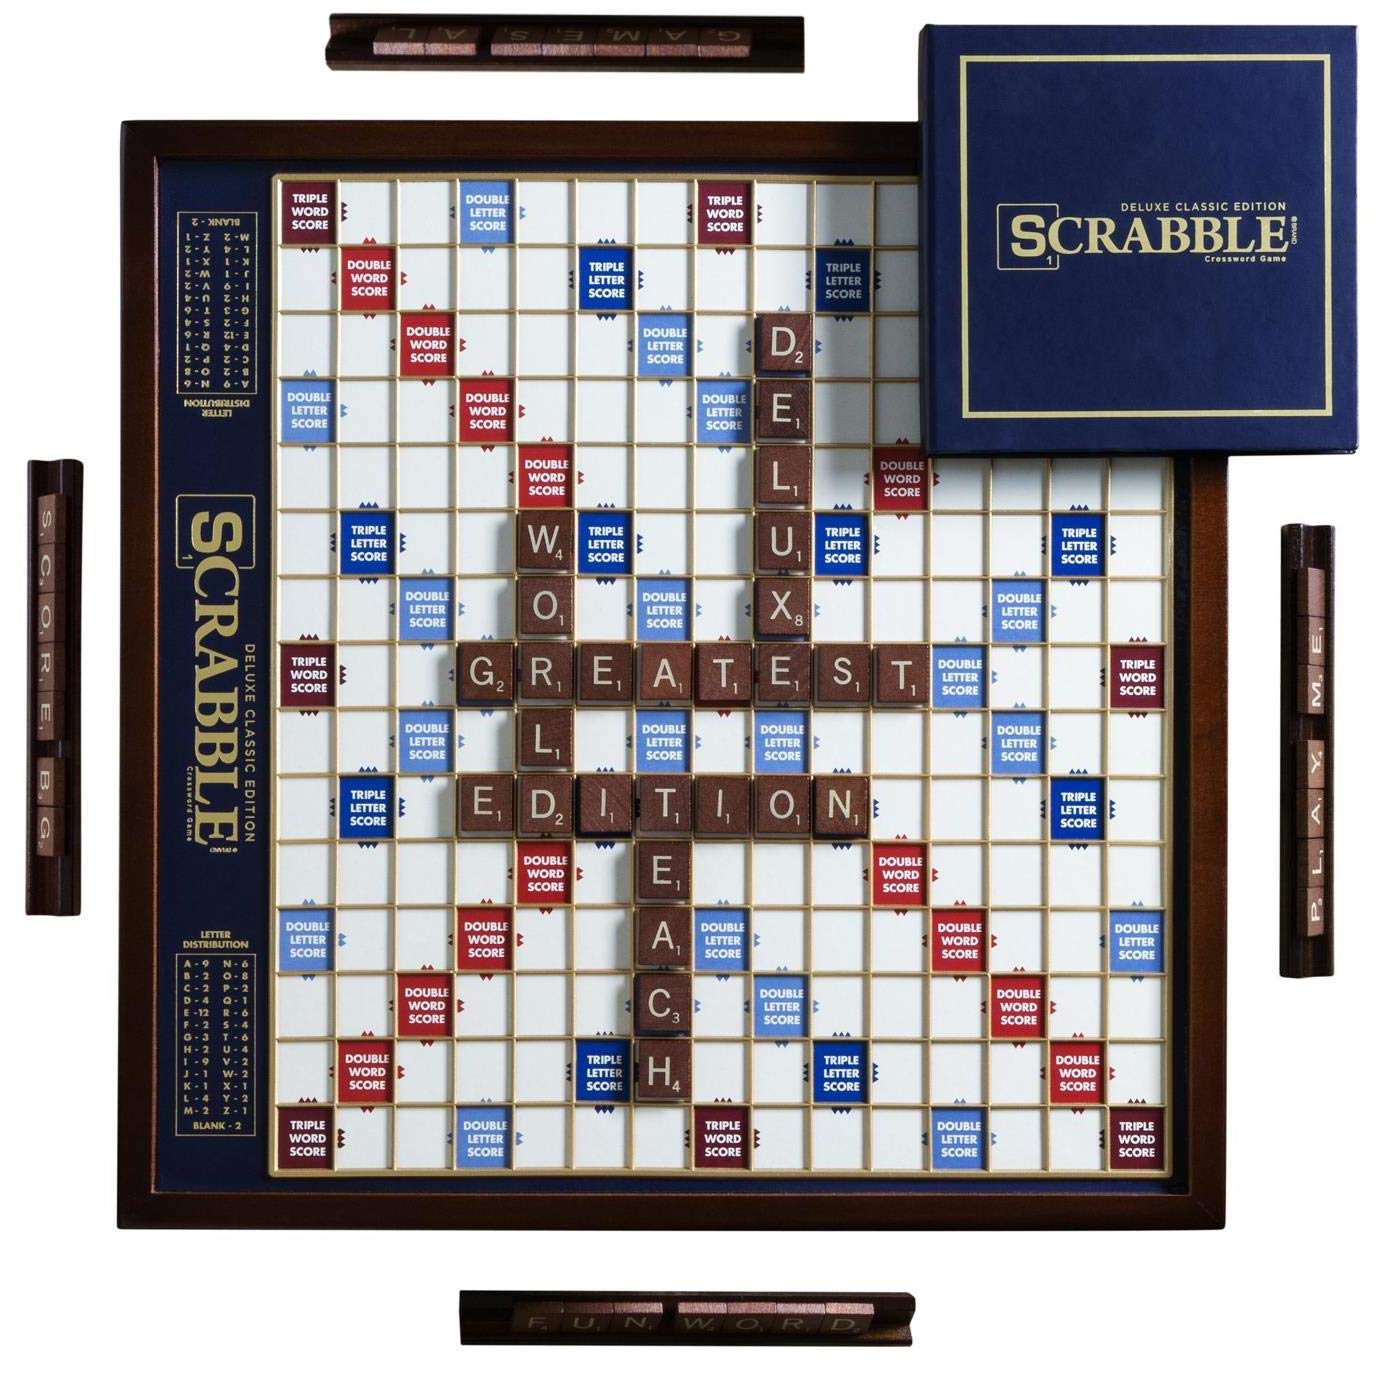 Scrabble game board with the word EXING formed on it.